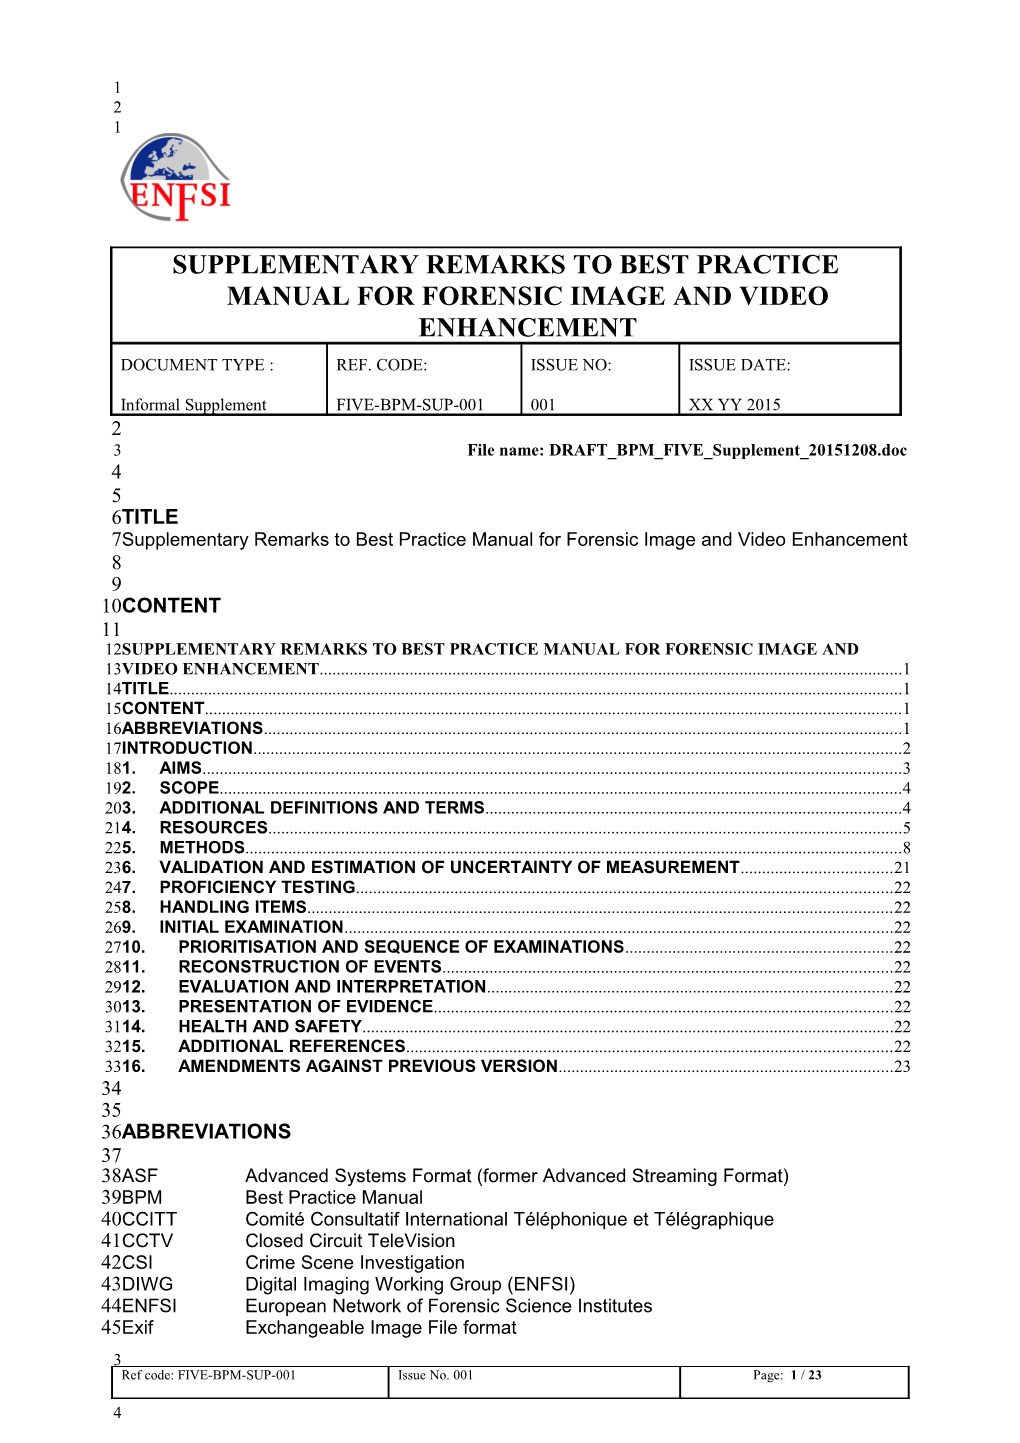 File Name: DRAFT BPM FIVE Supplement 20151208